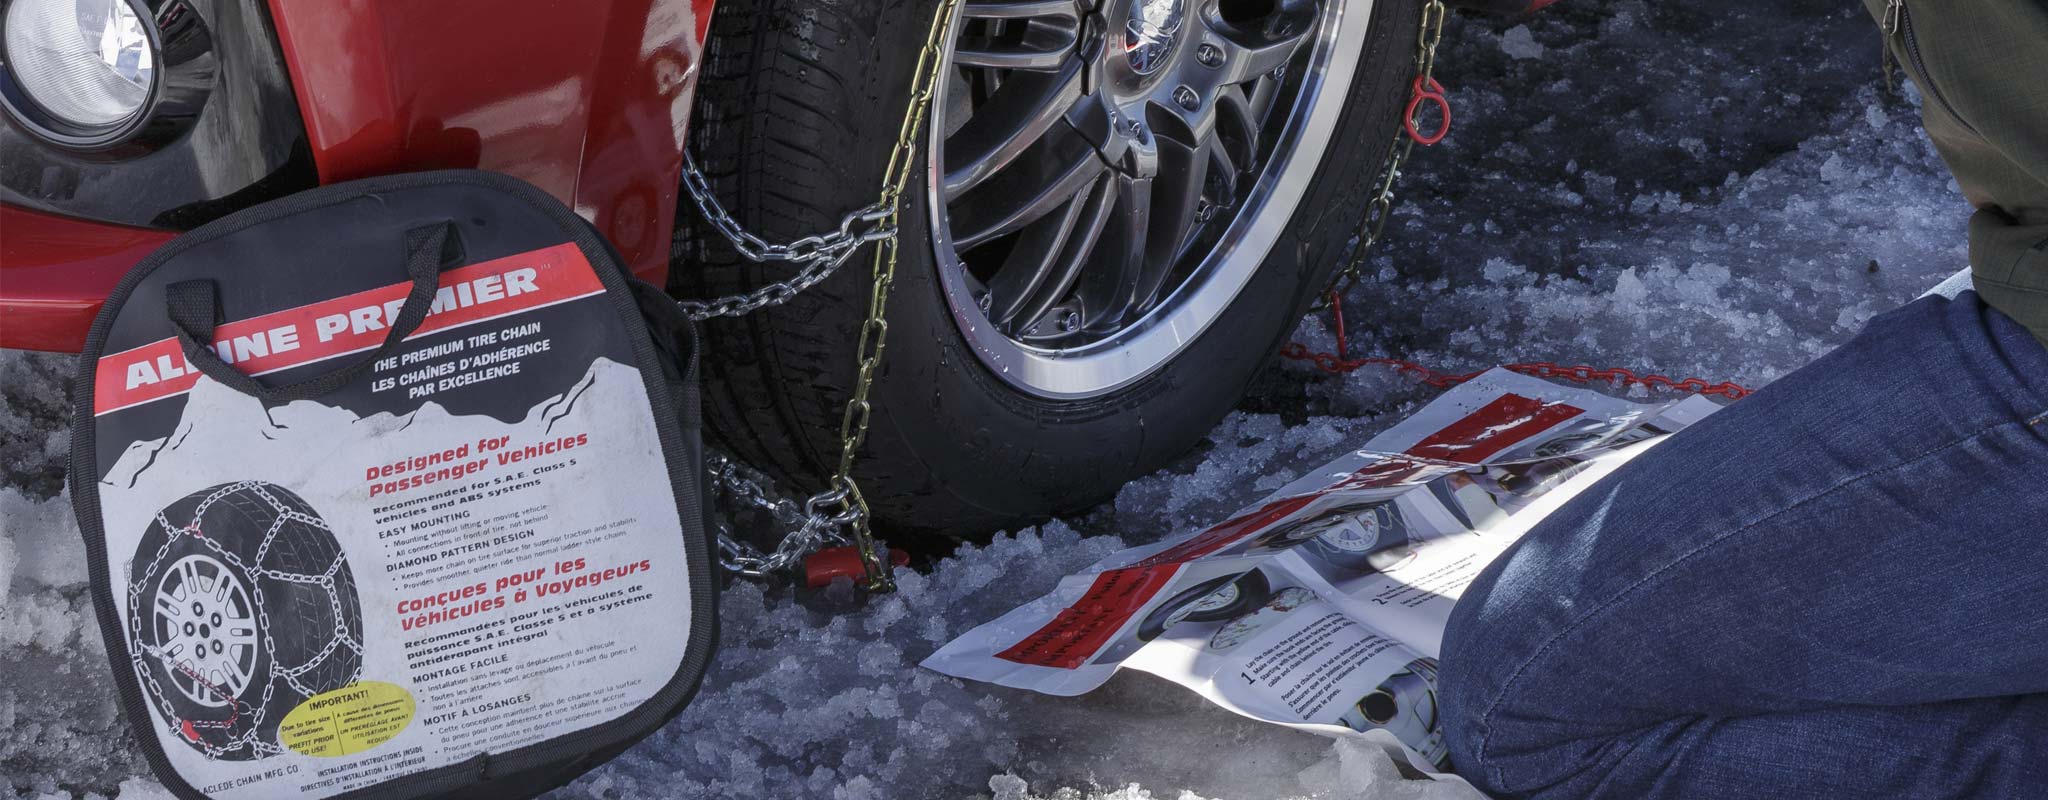 A person putting snow chains on their passenger vehicle.